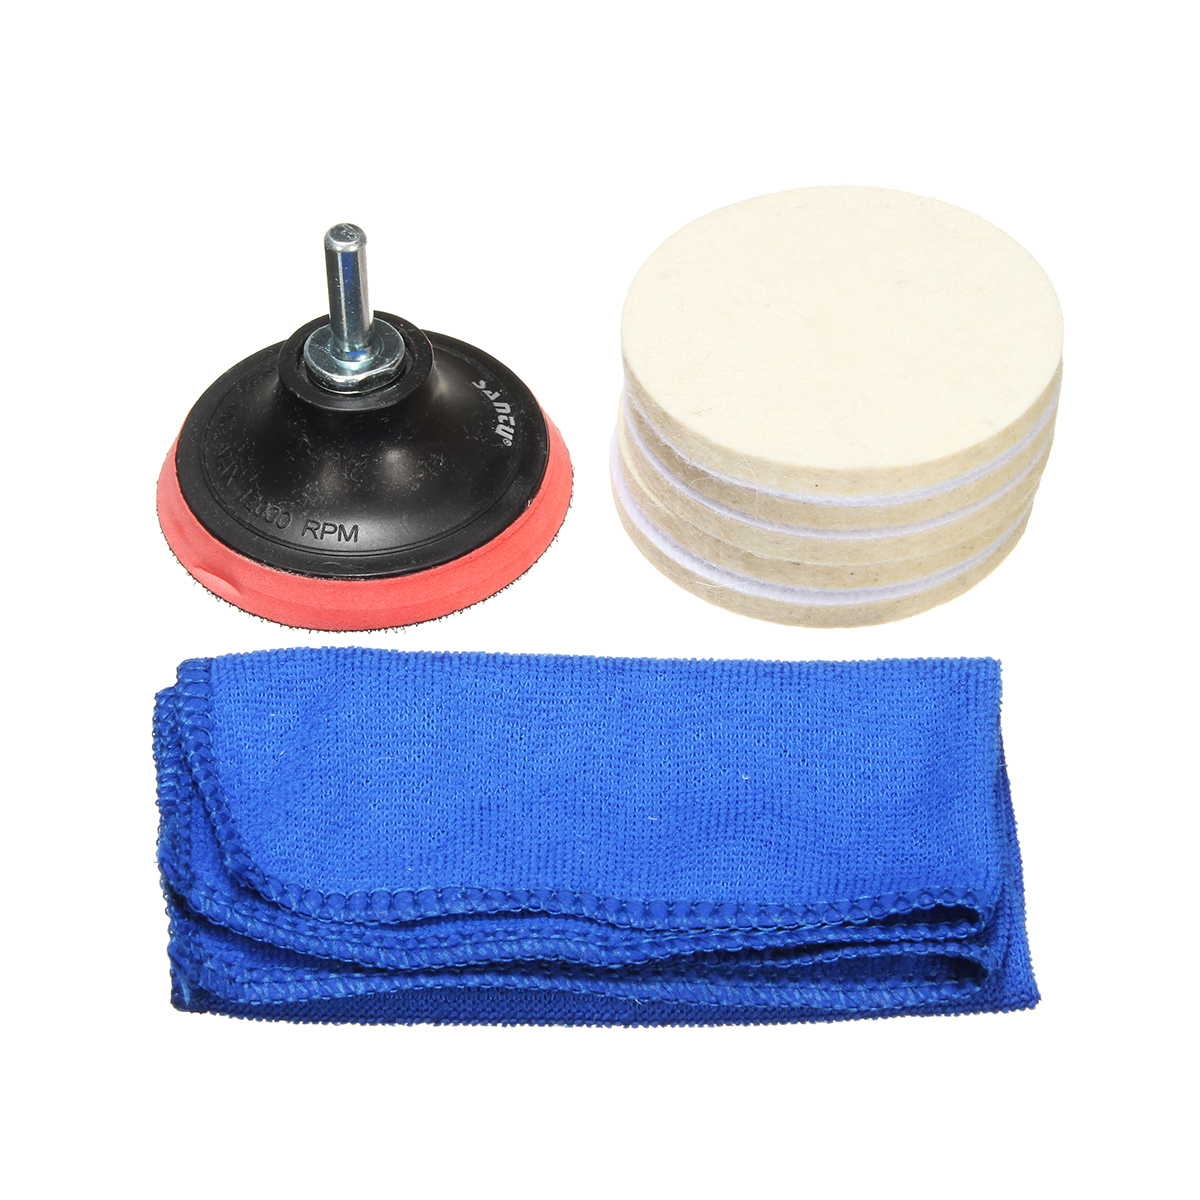 75mm-Glass-Polishing-Kit-for-Removing-Burrs-Rust-Dust-Remove-the-Oxide-Layer-Coating-1940454-11